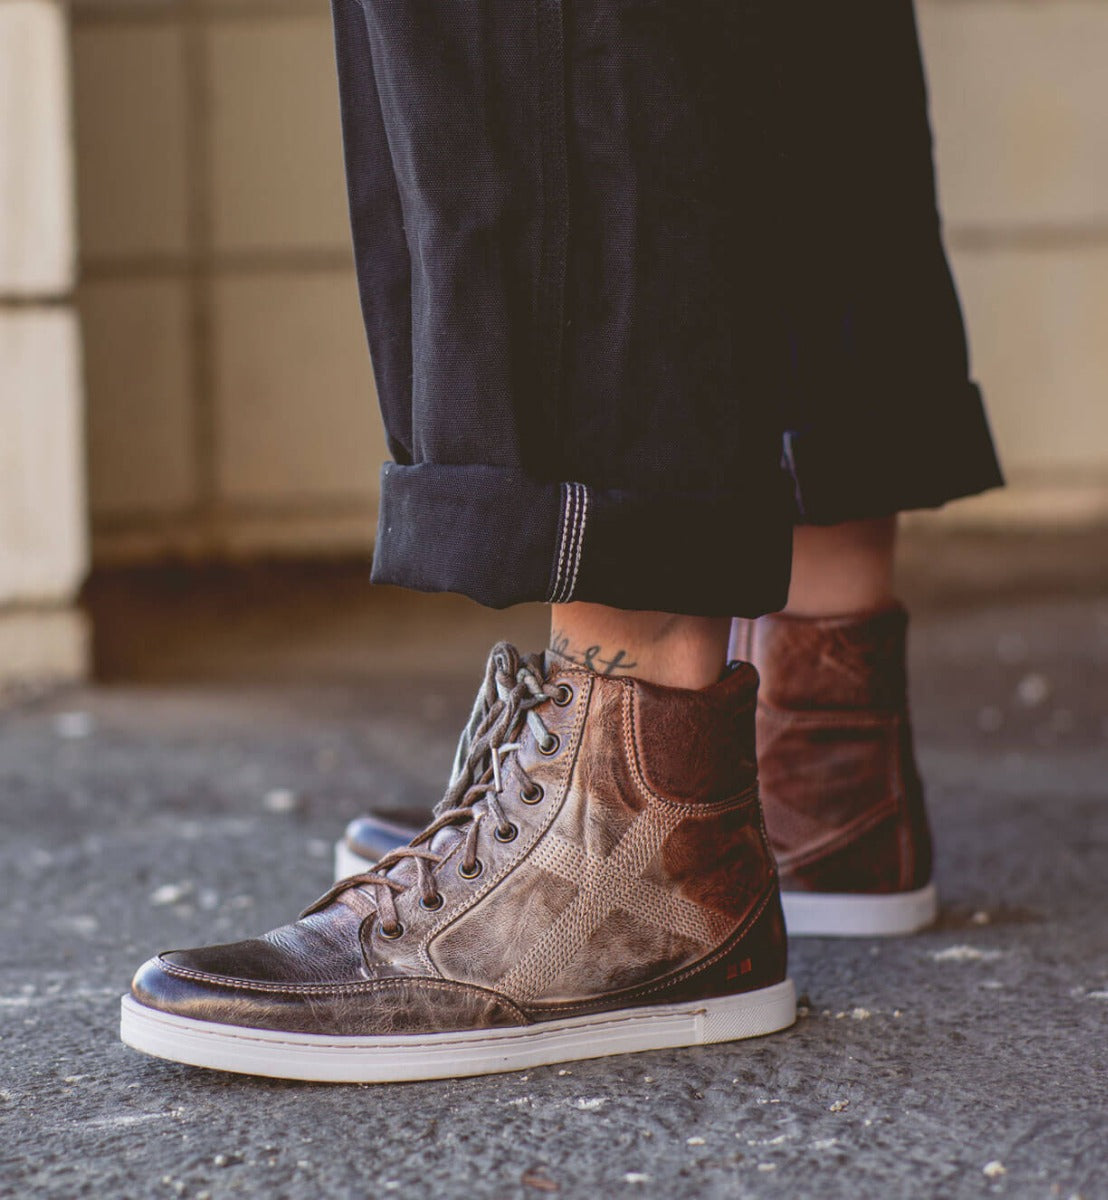 A person wearing a pair of brown Bed Stu Lordmind high top sneakers.